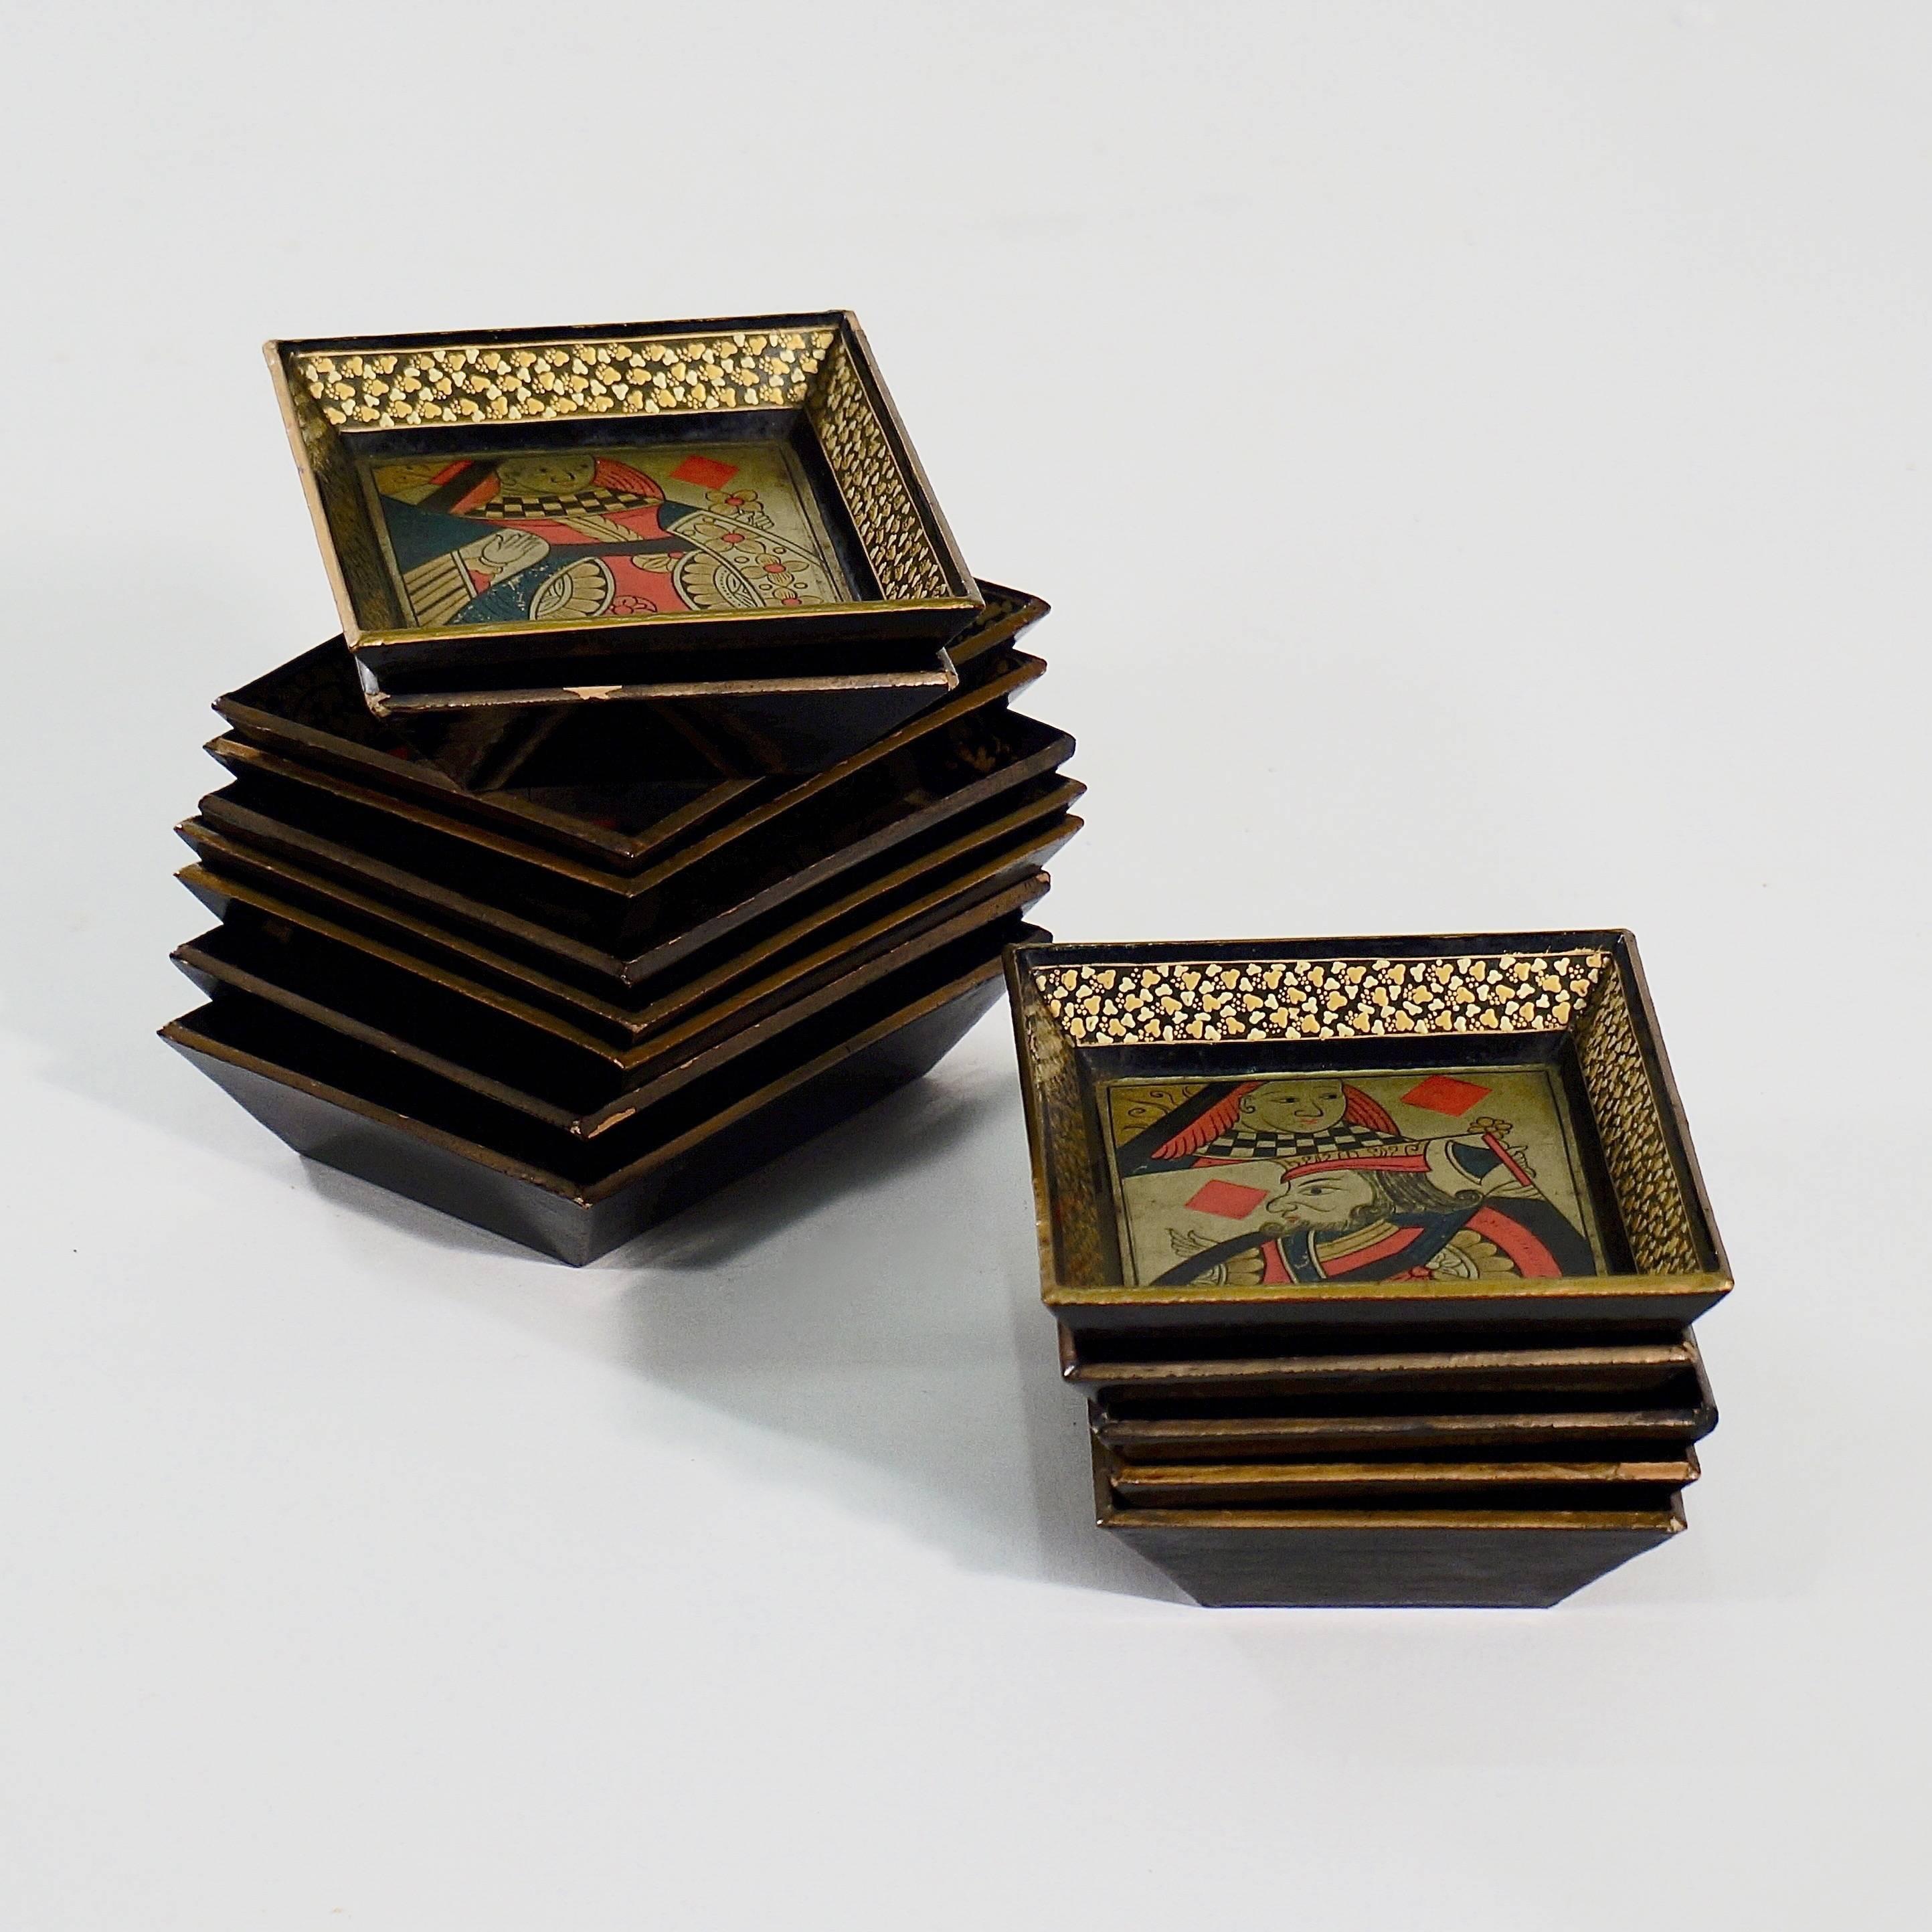 Each with painted, gilt and lacquered decoration depicting face cards or text.

England, late 19th century.

Priced individually.